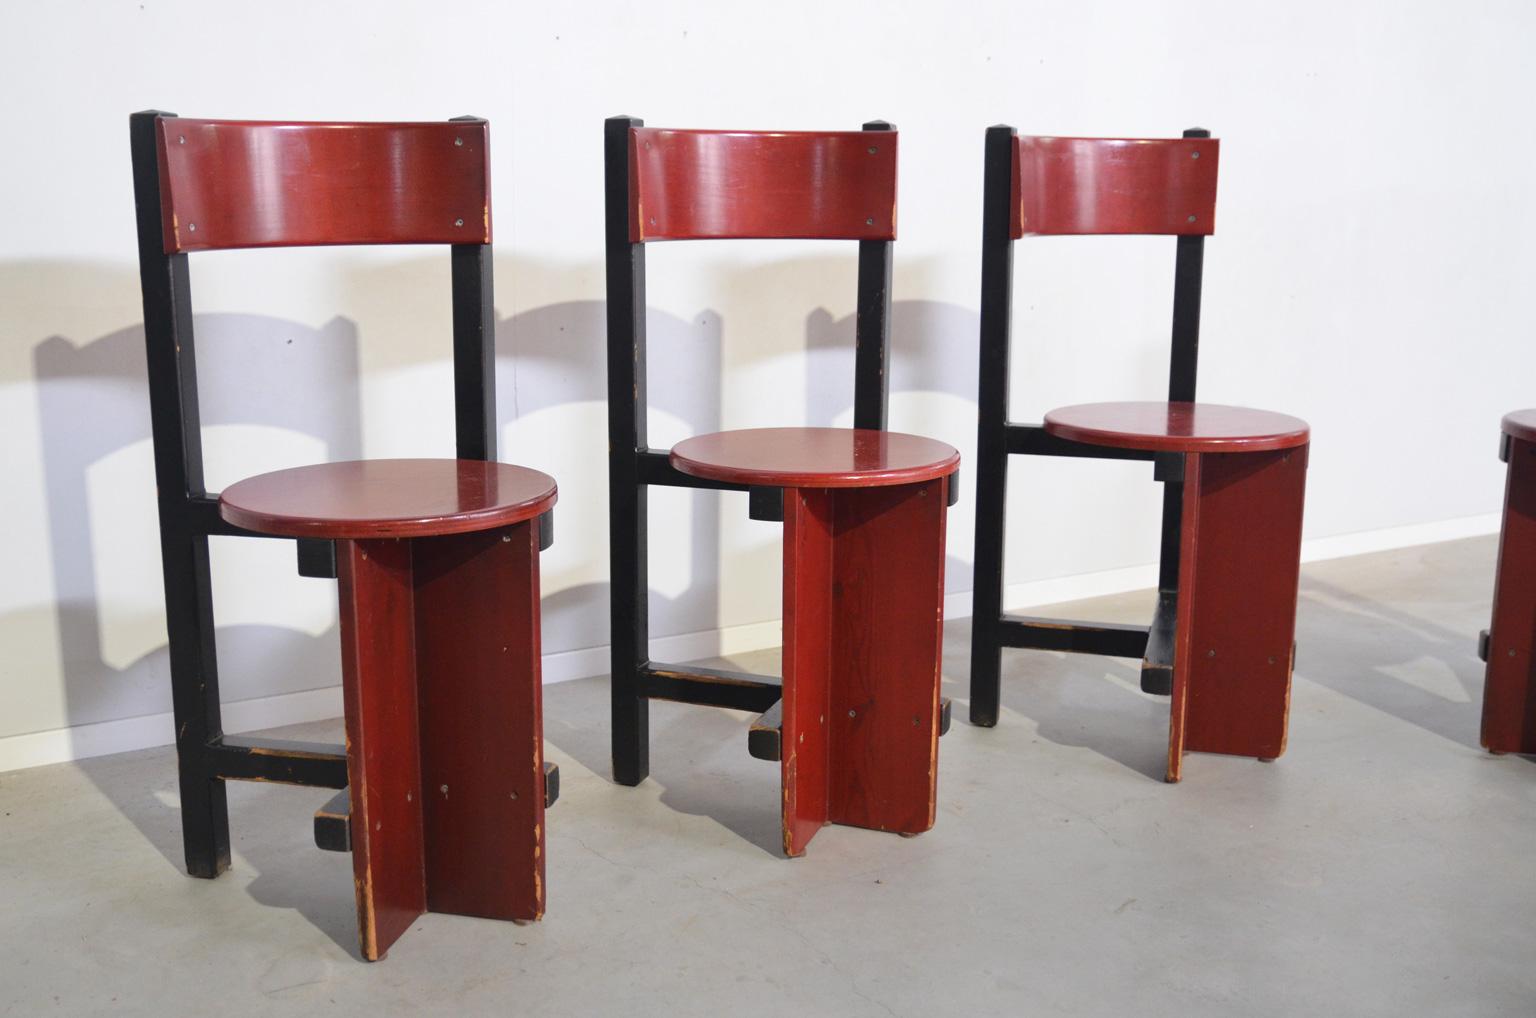 Dutch Bastille Chairs by Piet Blom for the Huizinga Group, Netherlands